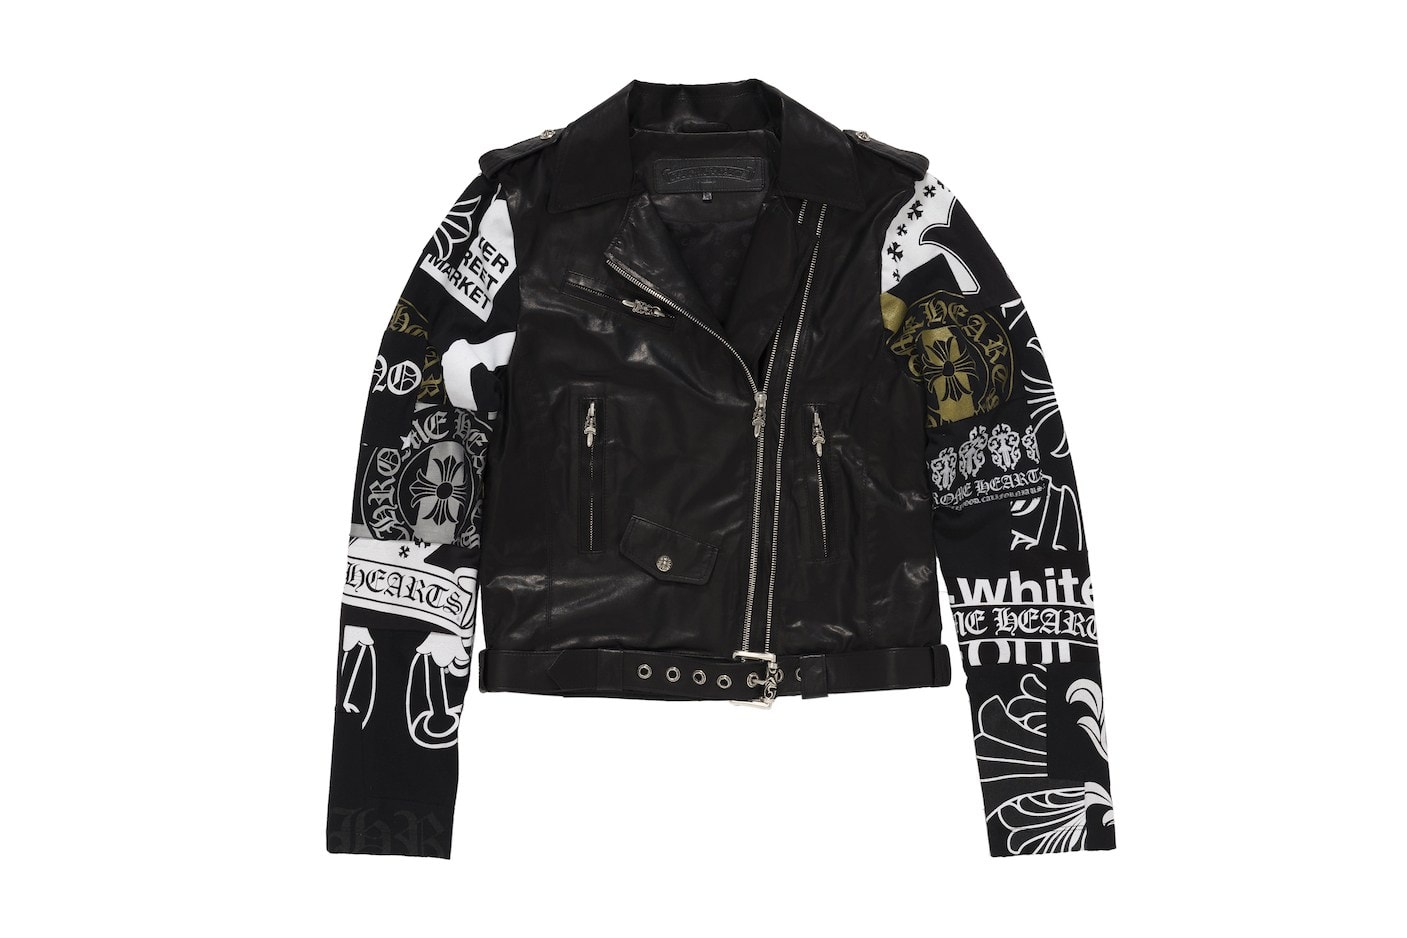 Chrome Hearts Dover Street Market Ginza Exclusive